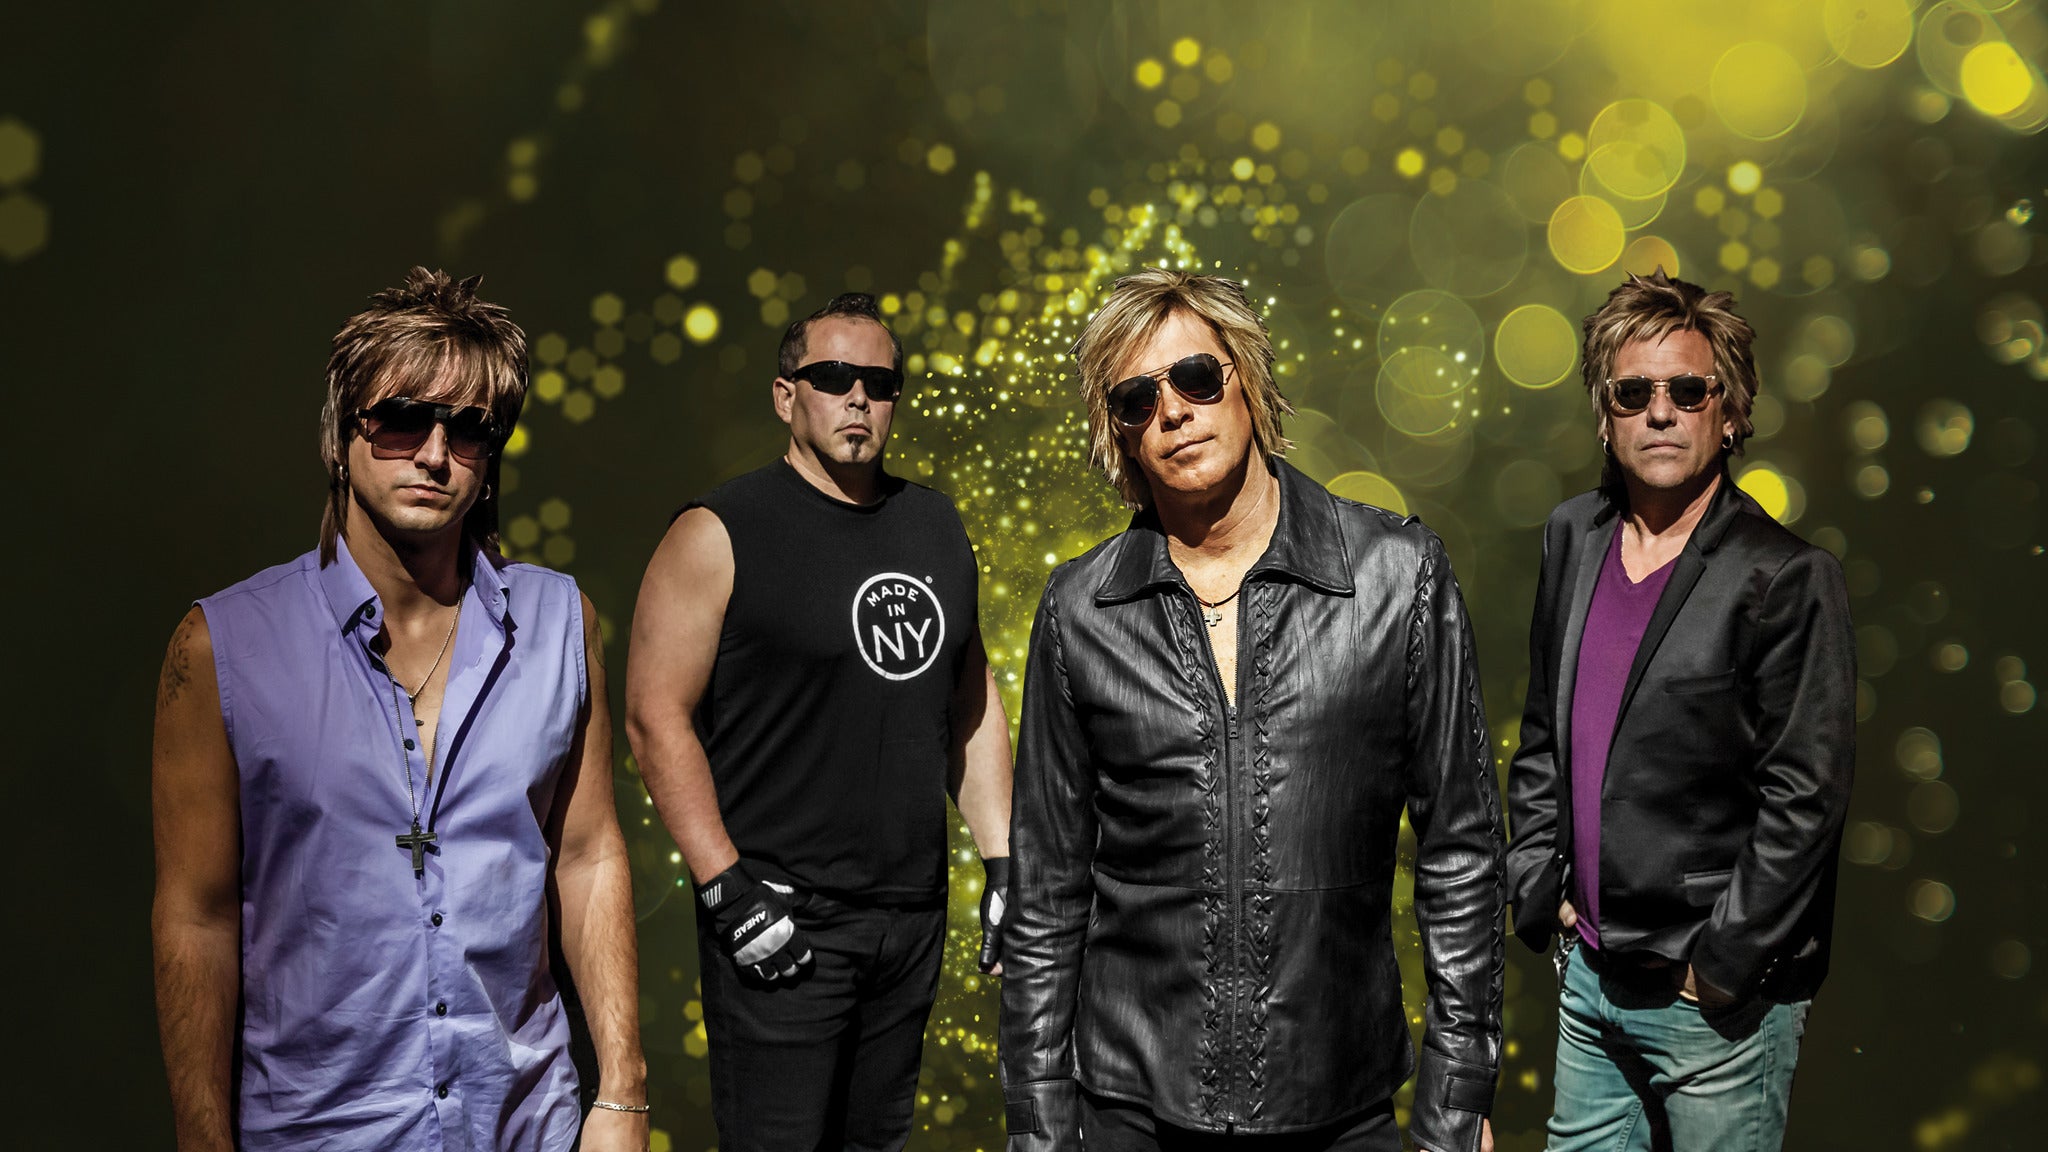 Slippery When Wet in Orlando promo photo for Live Nation presale offer code